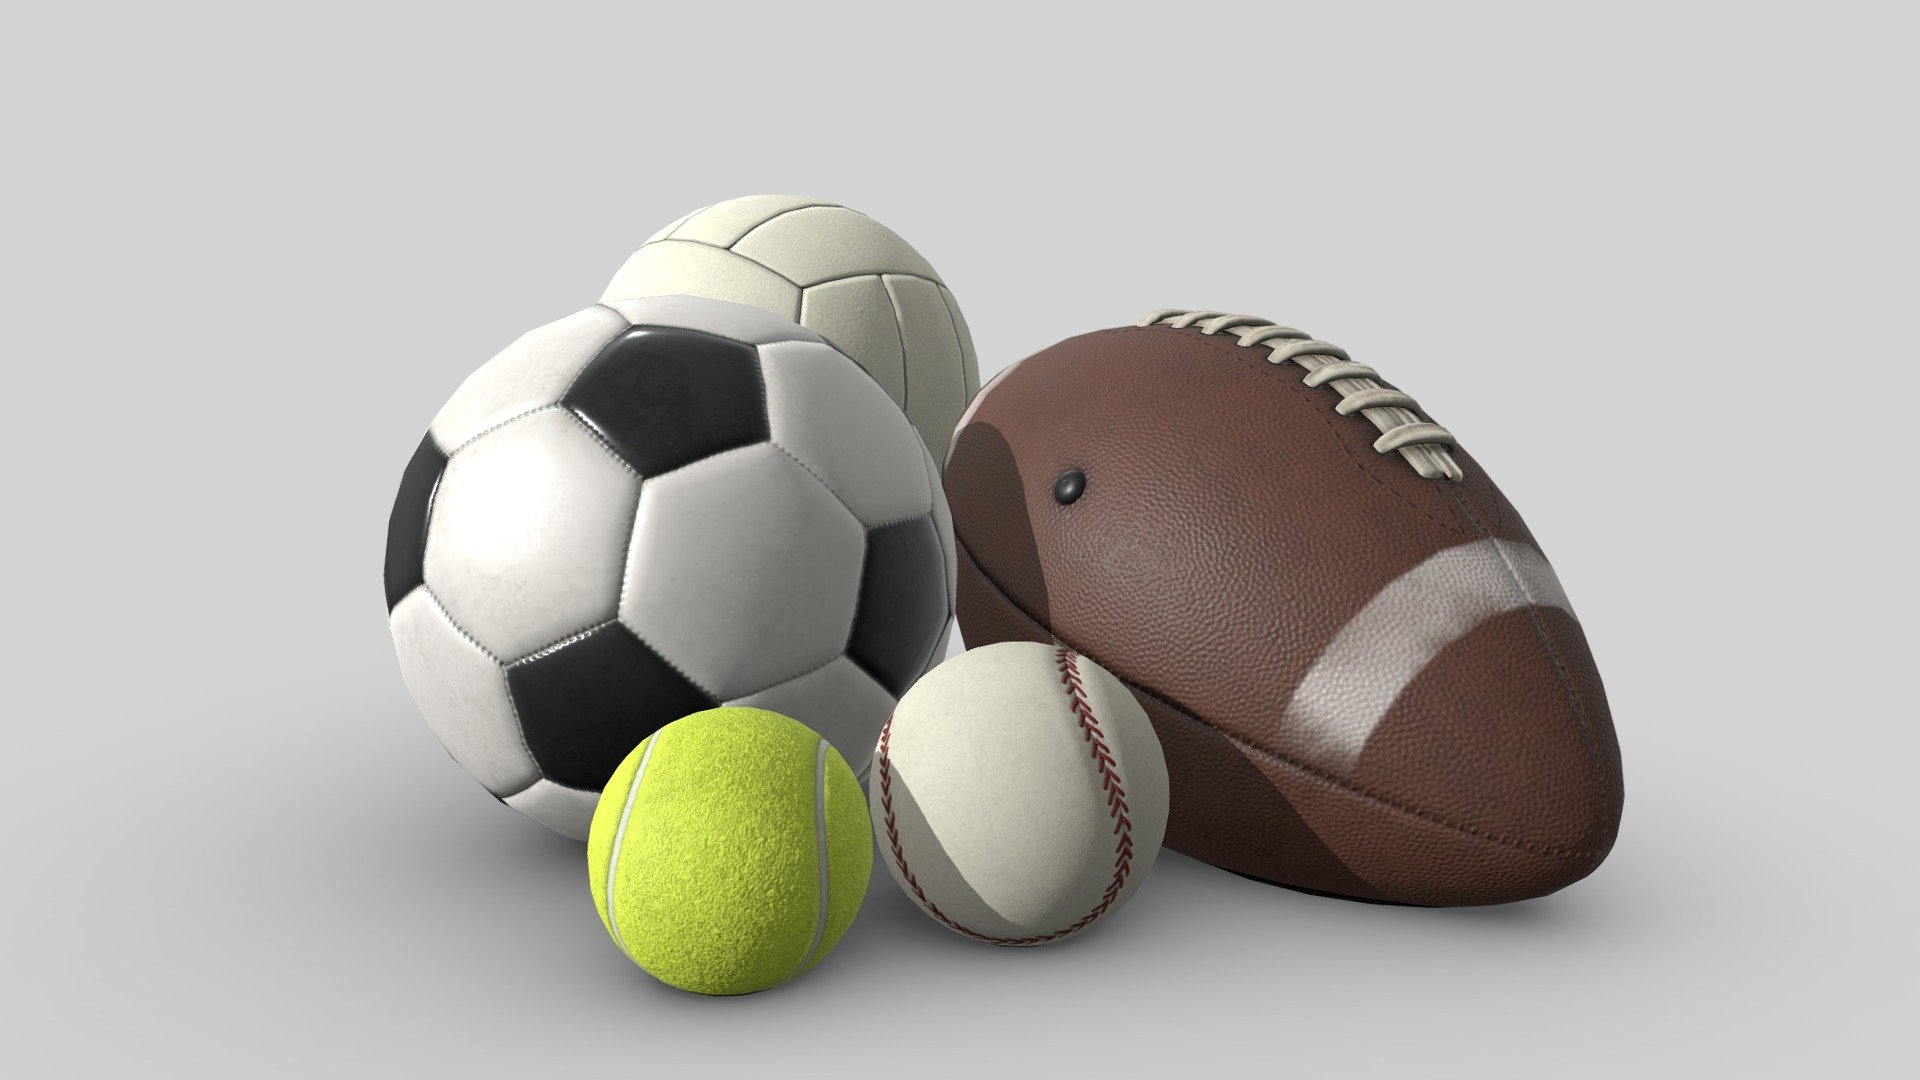 A collection of balls used in sports played all around the world. This pack includes a baseball, football, soccerball/futbol, tennisball, and volleyball. Details on these models have been achieved through normal map baking, so the models are low-poly and highly optimized for use in games and films.

I've included Unity URP-ready materials and an unposed version in the additional files. If you have trouble accessing this, please contact me here.

If you like these assets, please consider supporting me with a tip on Ko-fi 3d model